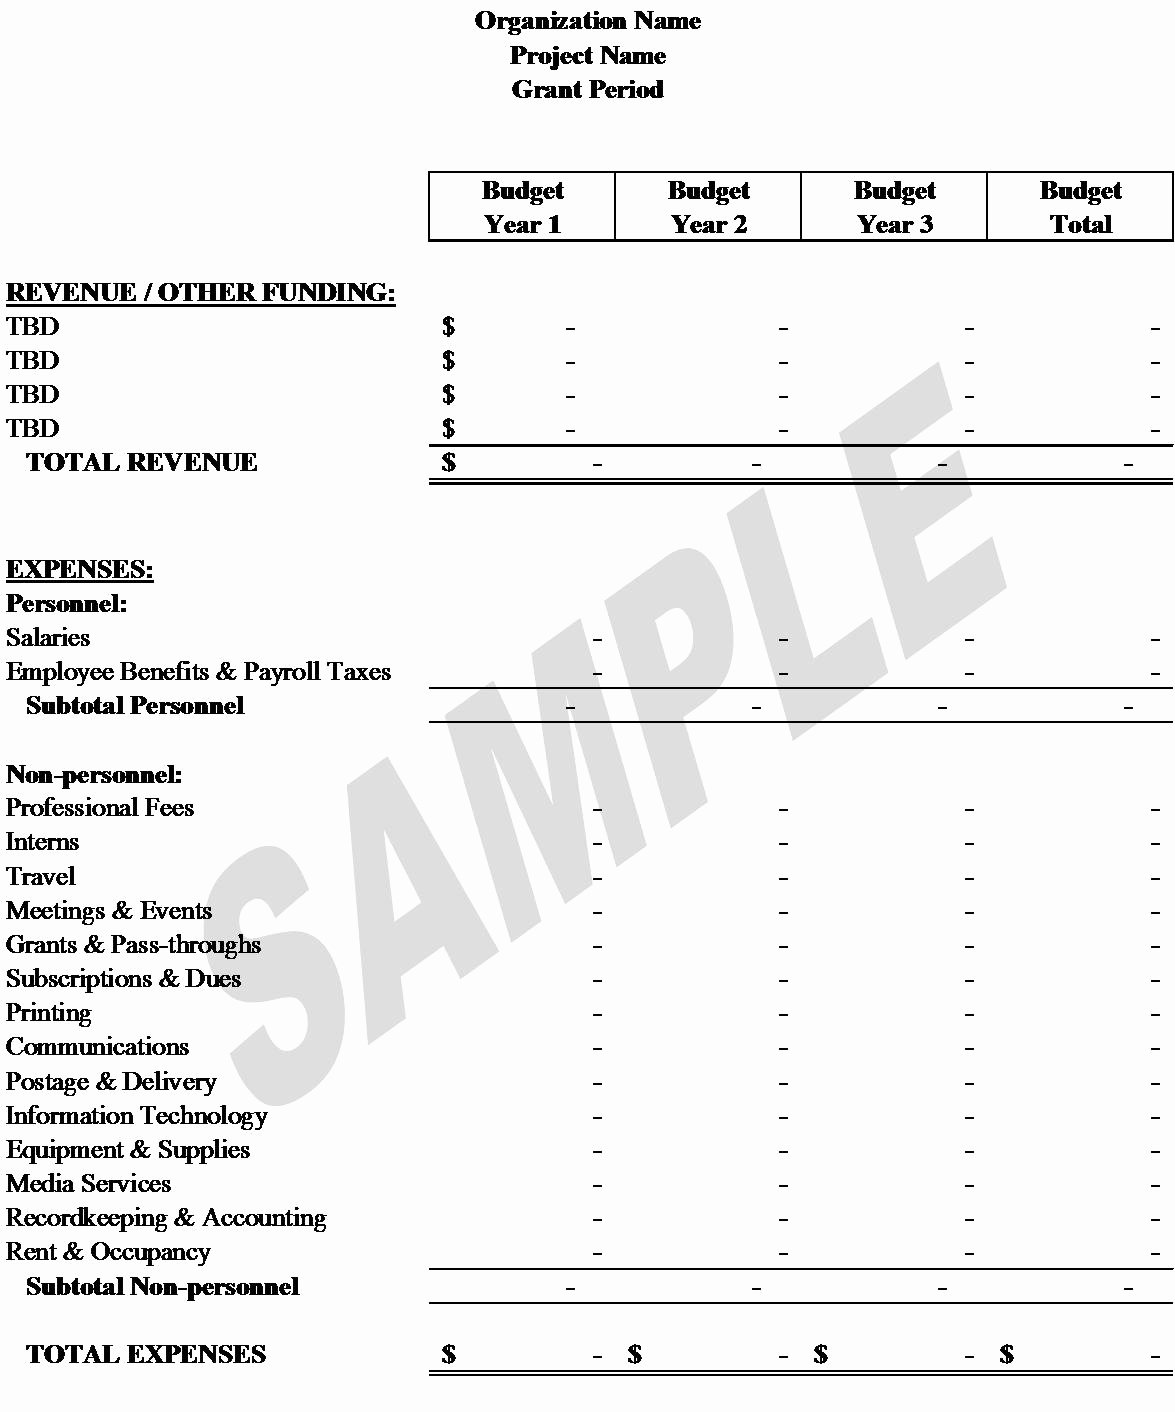 Grant Proposal Budget Template Lovely Funding Application Bud Template